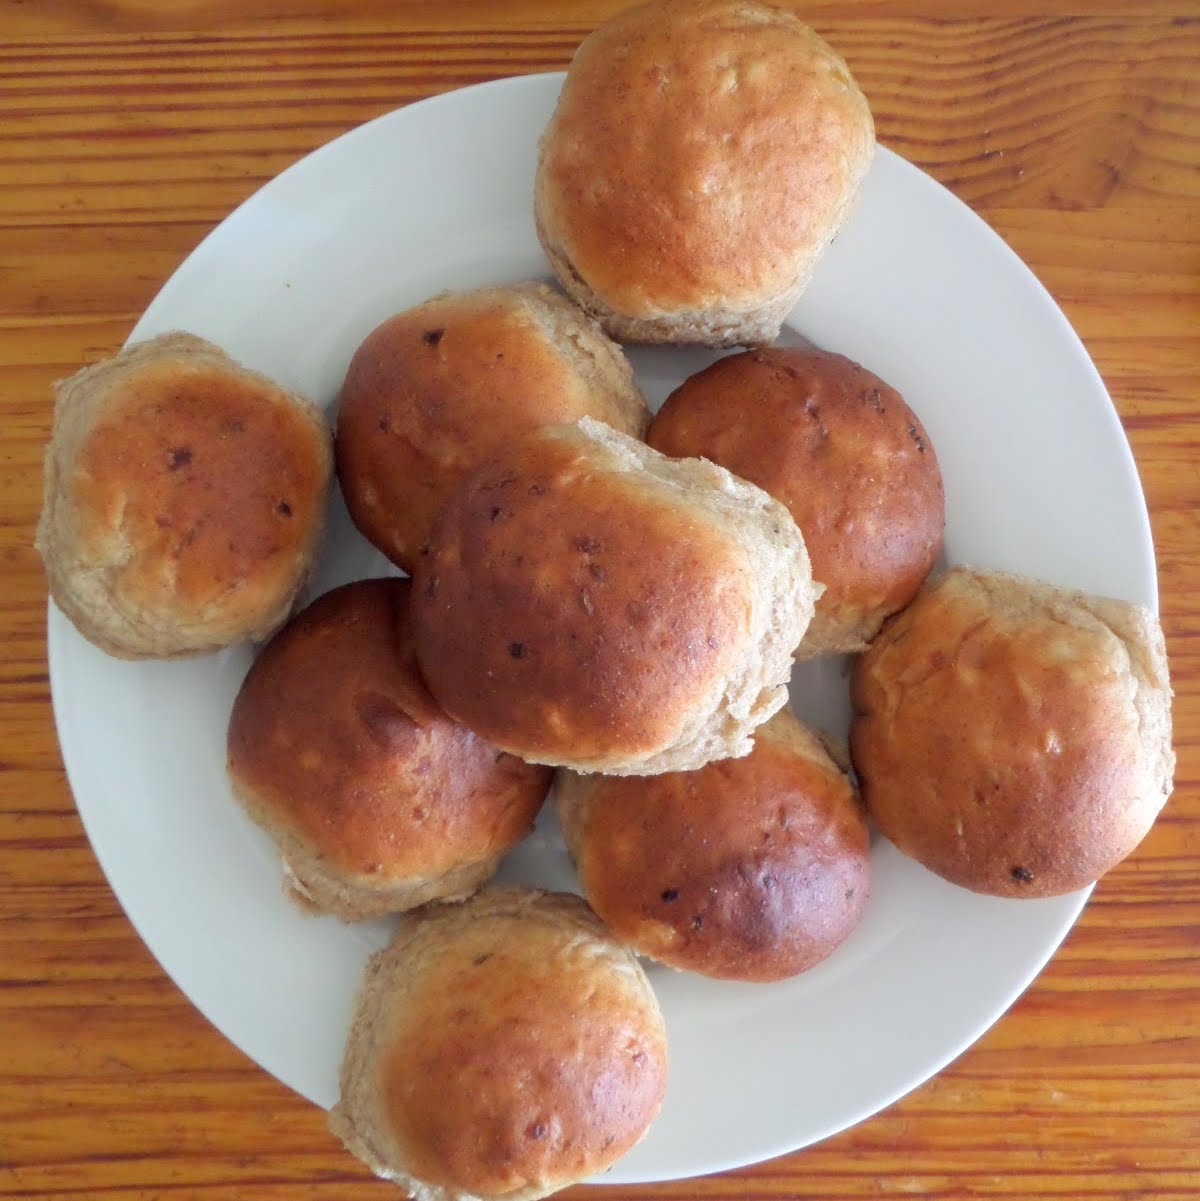 Rye Yeast Rolls:  Soft and fluffy yeast rolls made with rye flour, onions, and caraway seeds.